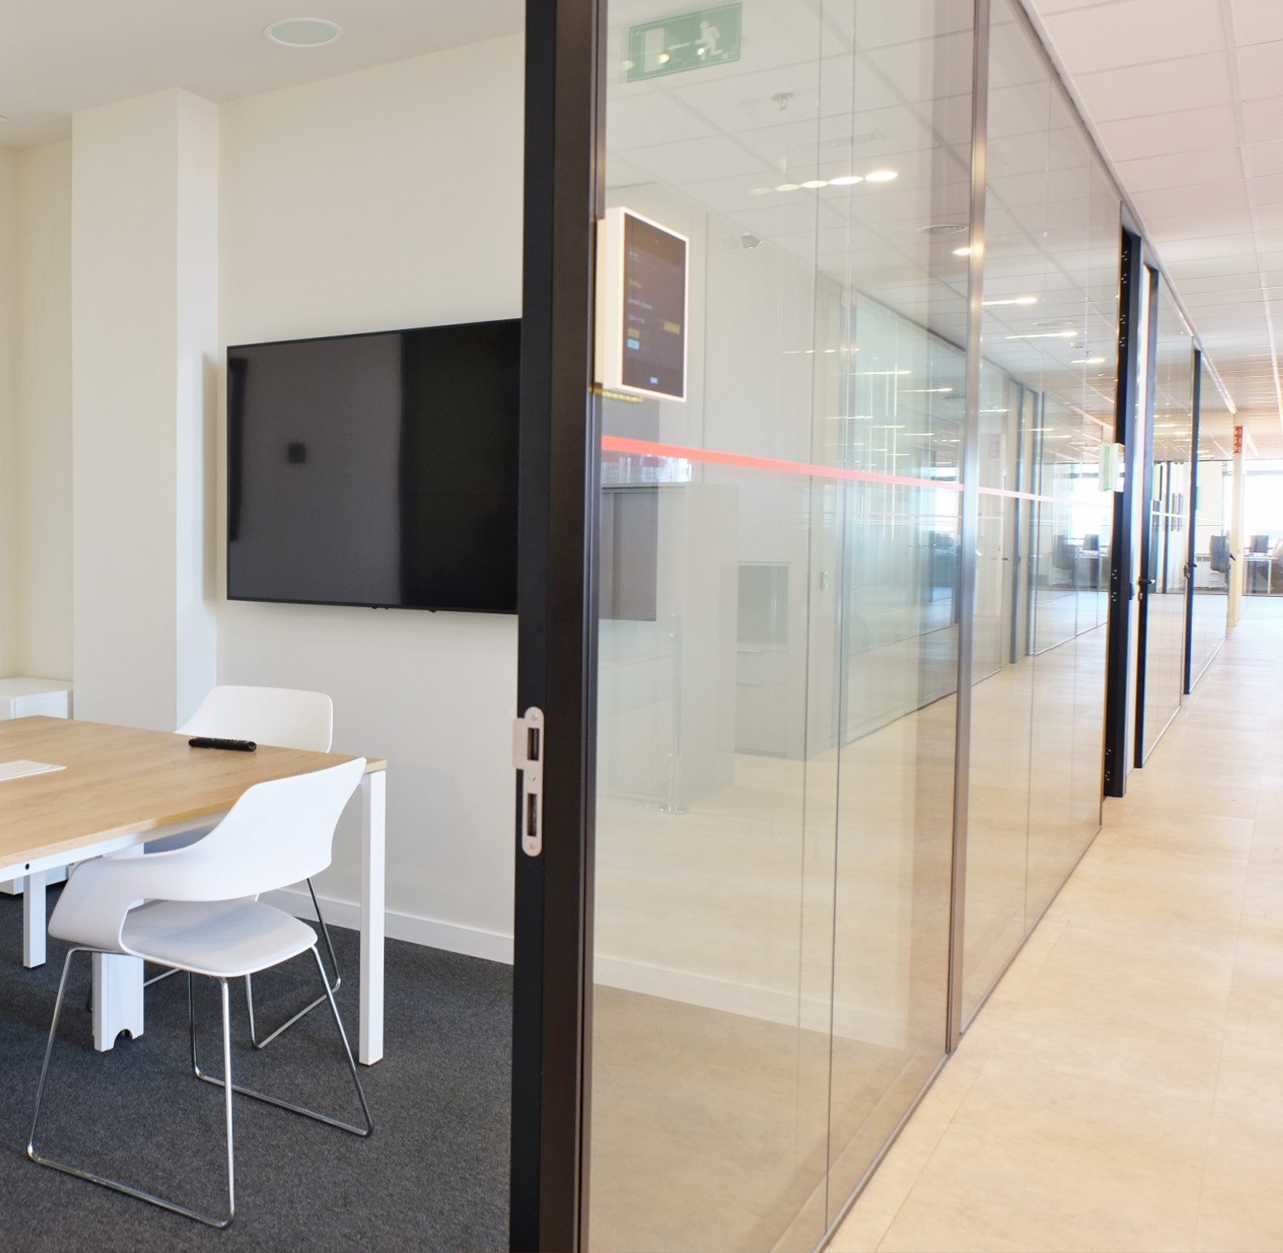 Inology equips the meeting rooms of its new offices in Terrassa with AV solutions